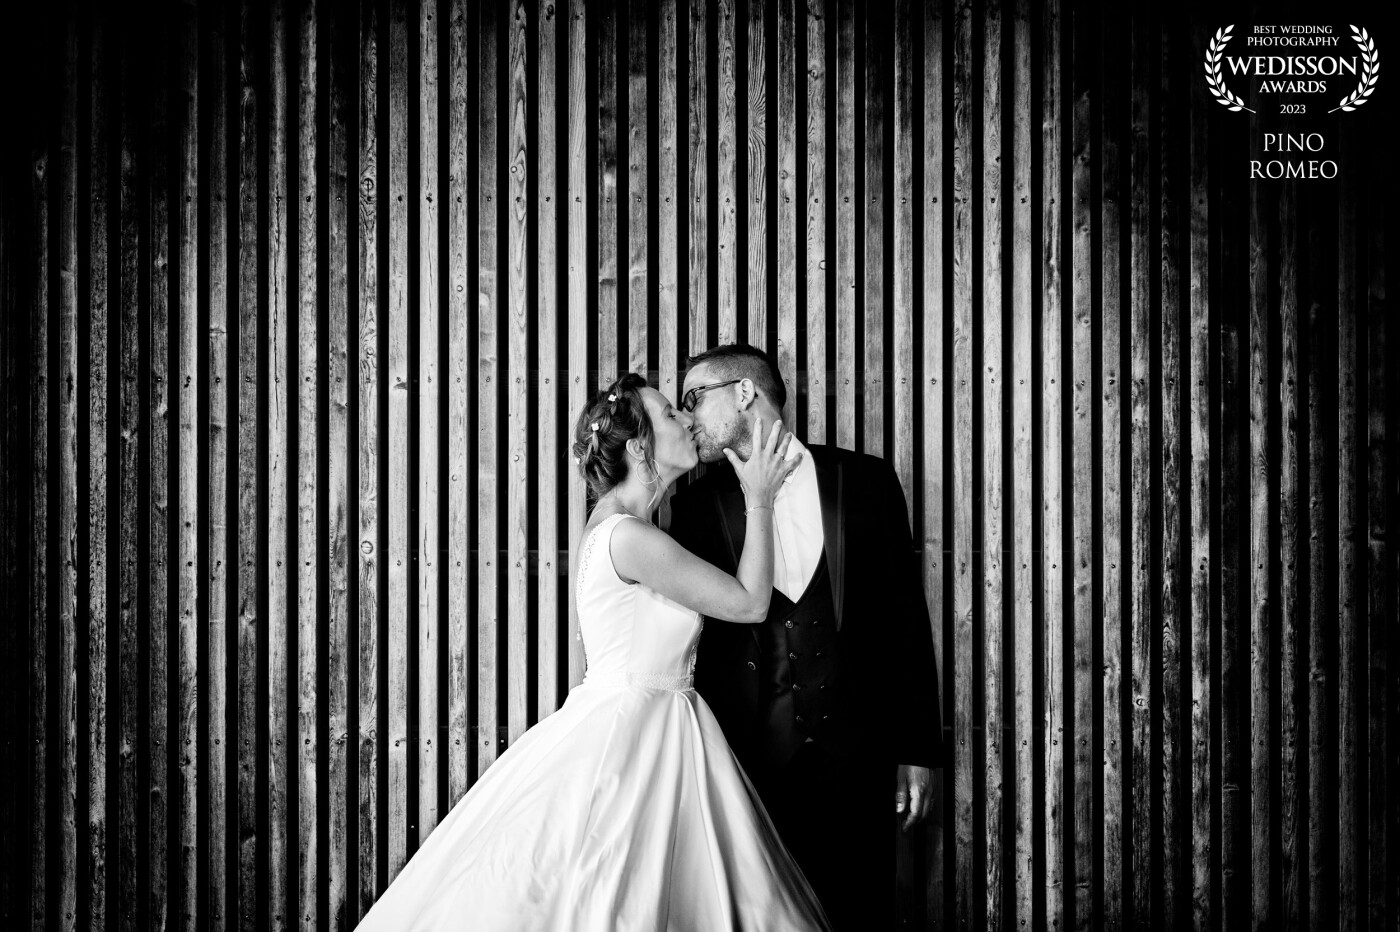 At Caroline and Nicolas's wedding, this wooden wall was a real eye-catcher during the cocktail party.  The perfect backdrop for a wild kiss!